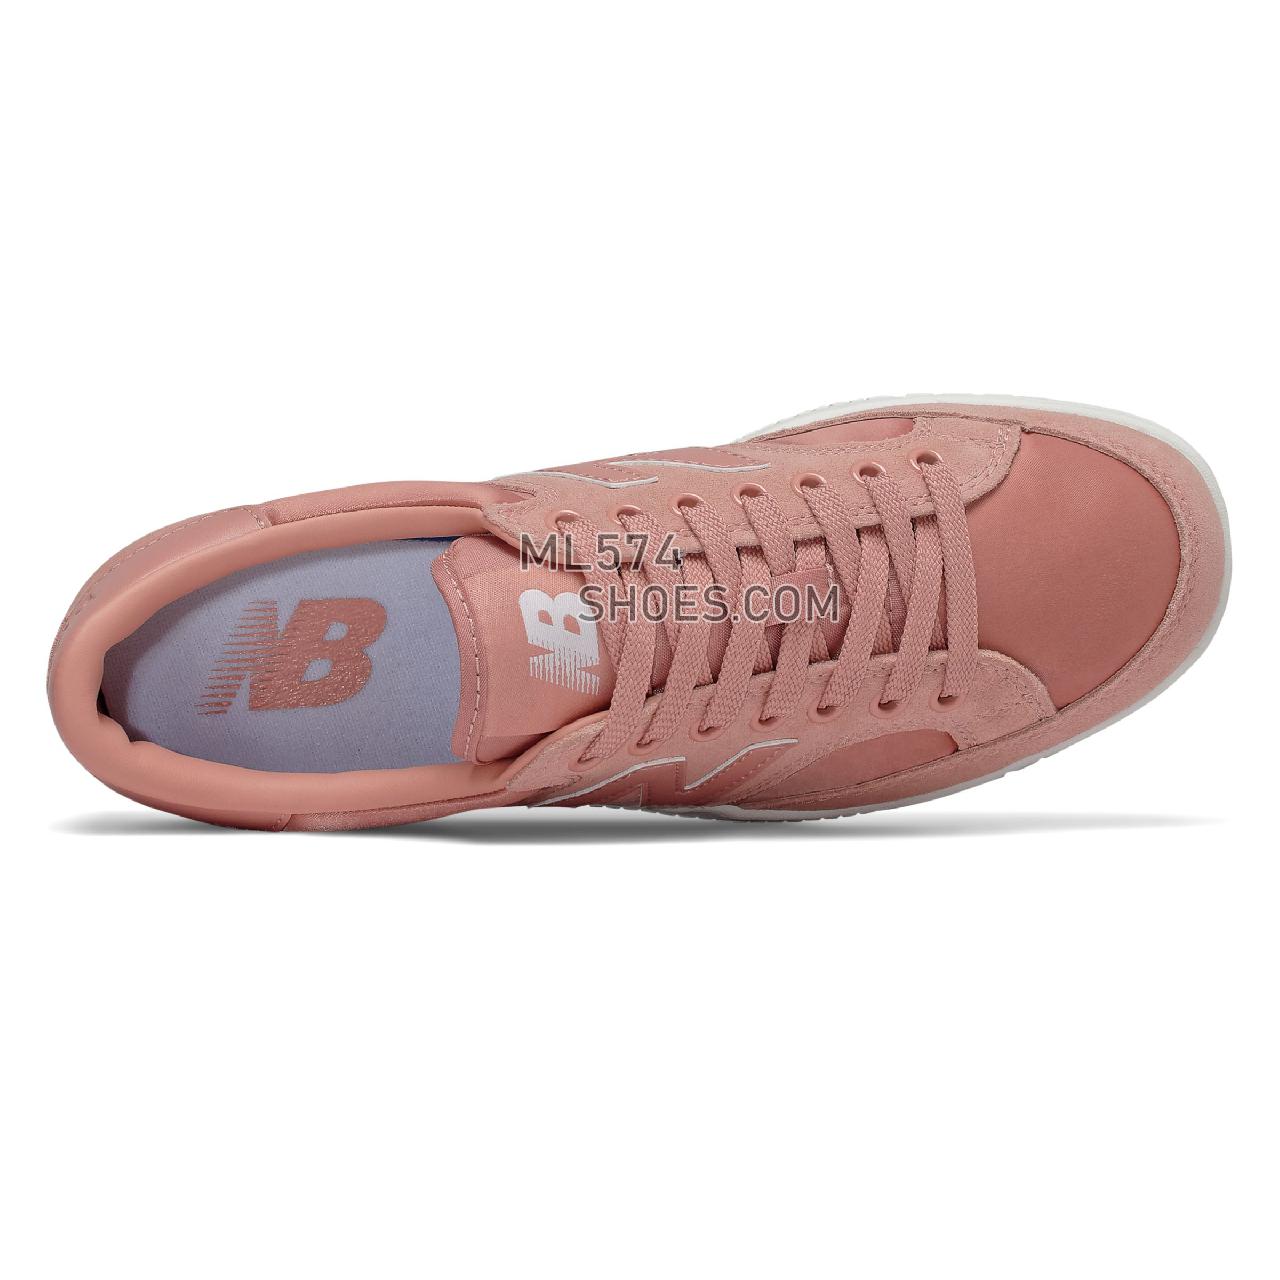 New Balance Pro Court Cup - Women's Court Classics - Faded Cedar with Munsell White - PROWTCLC